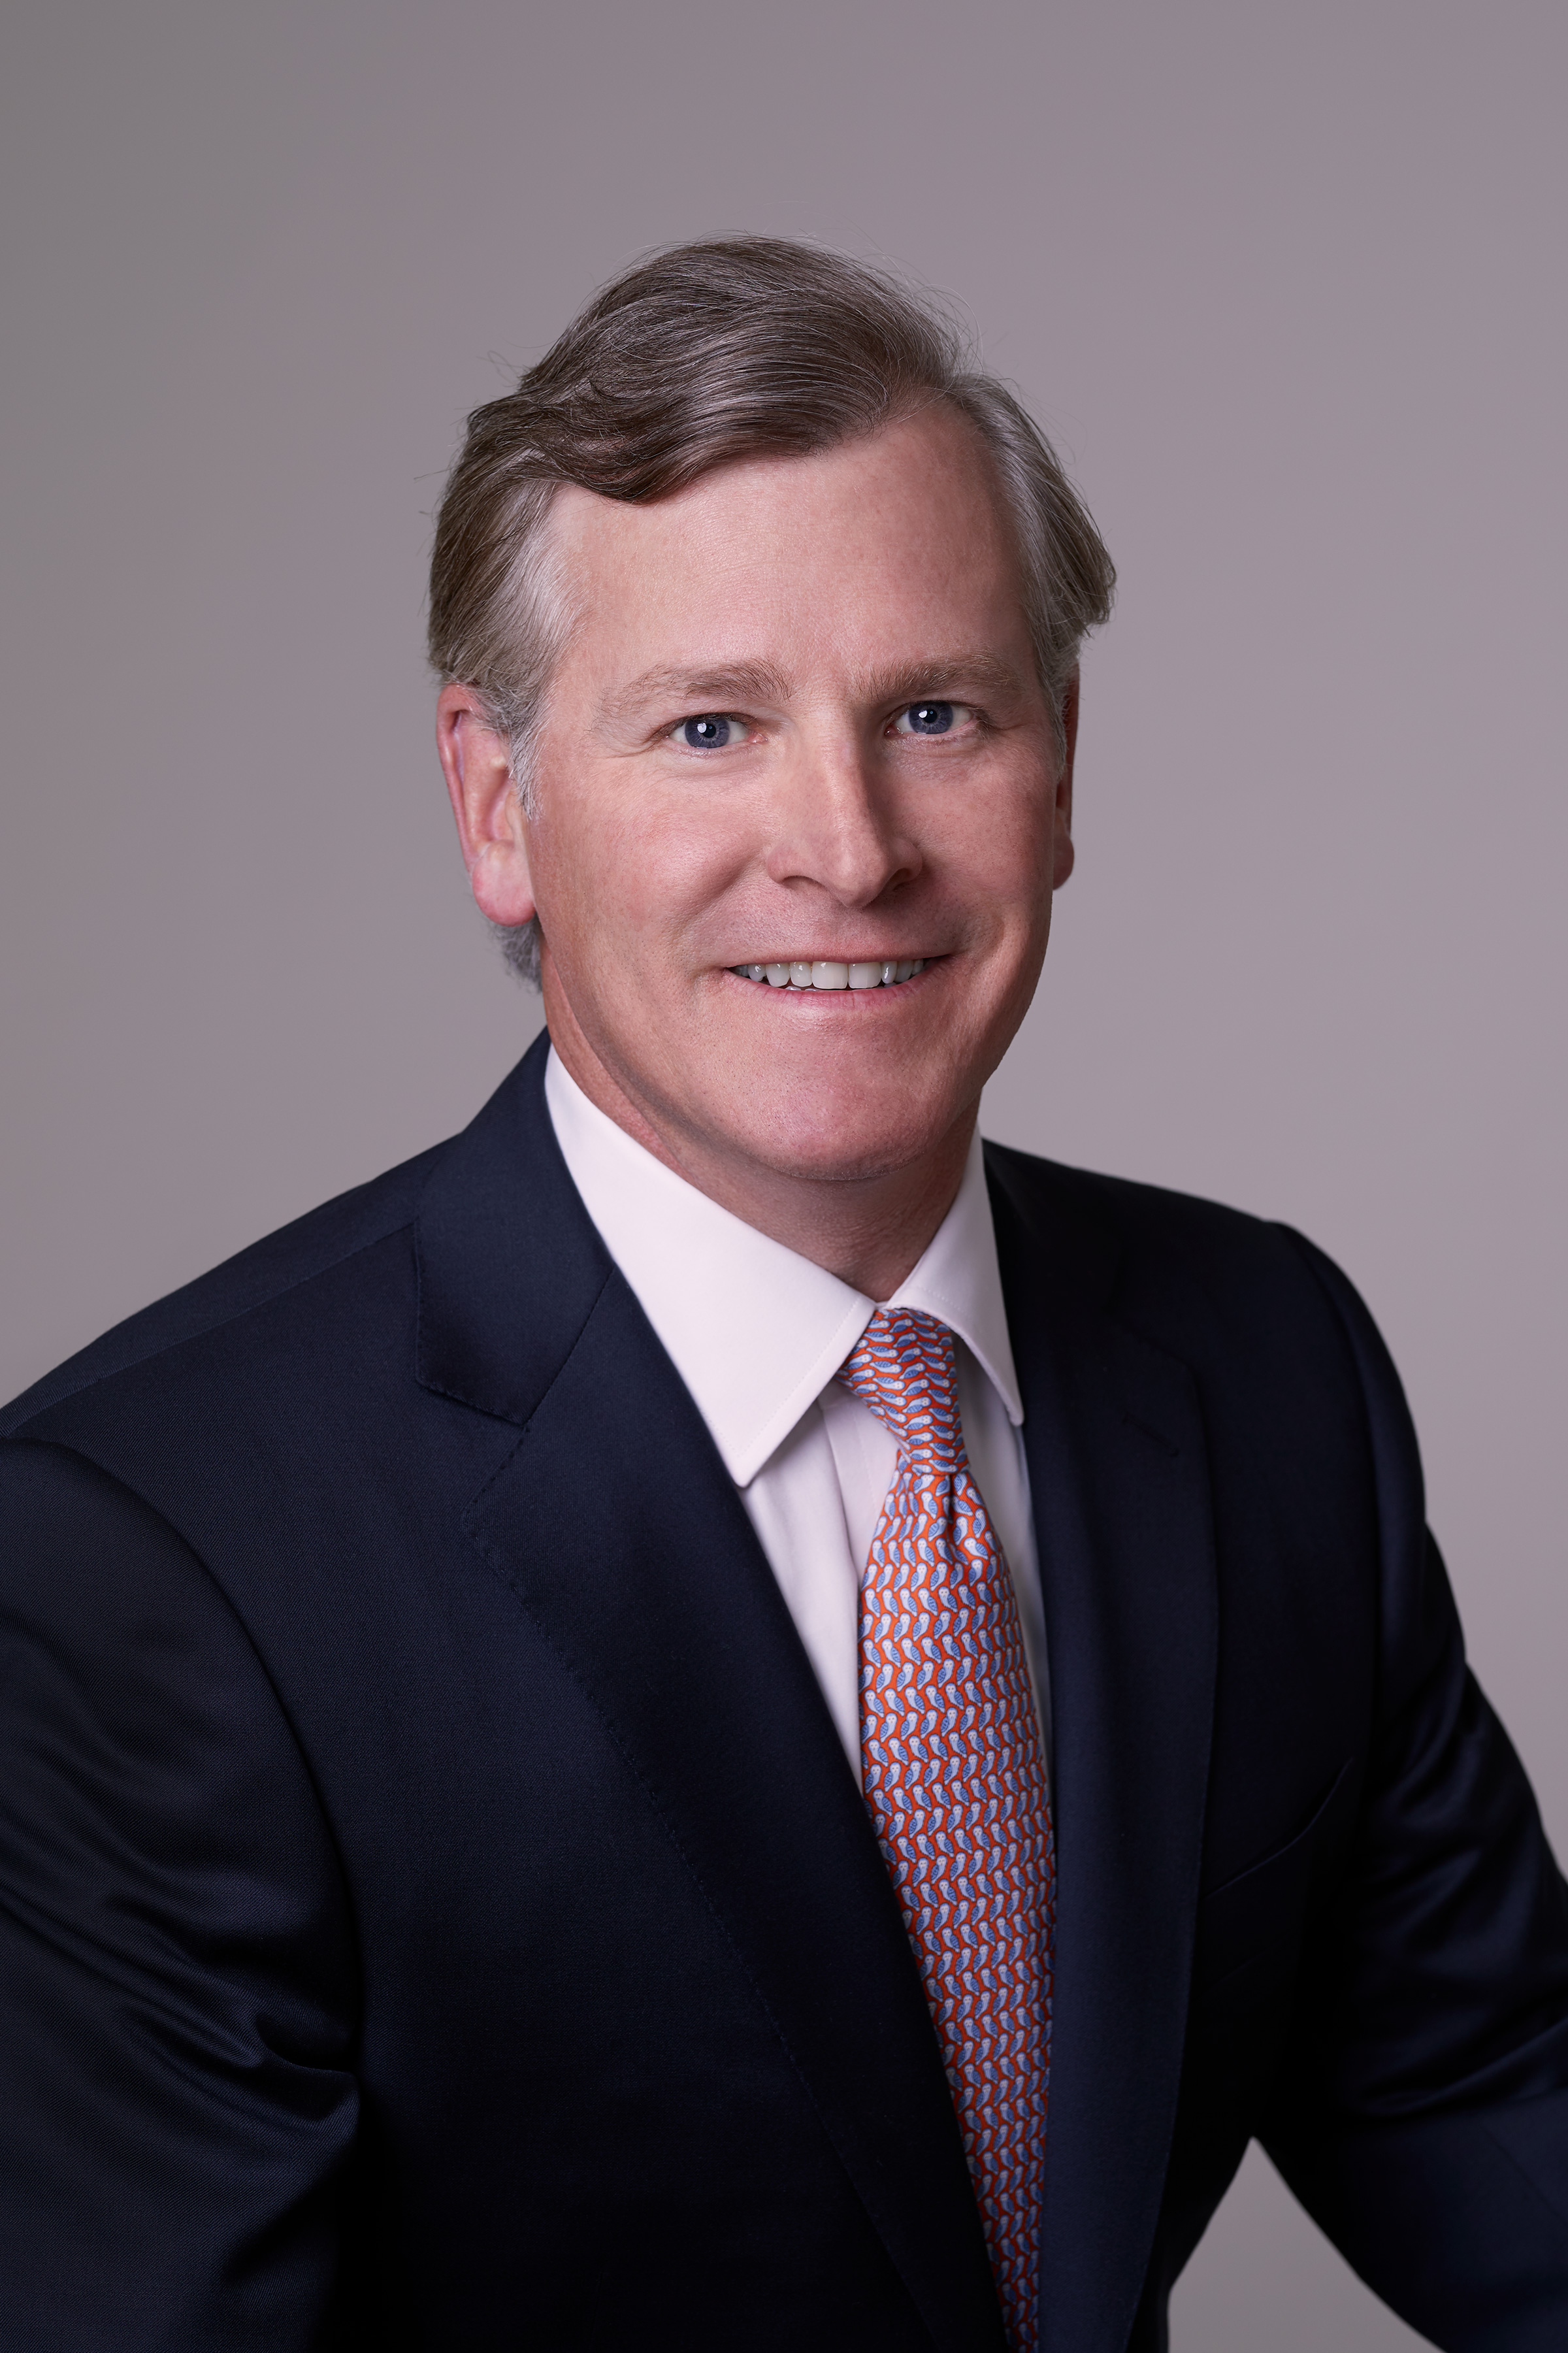 Scott Sealy, Jr., Sealy & Company's Chief Investment Officer, led the deal alongside Sealy's Investment Services team.